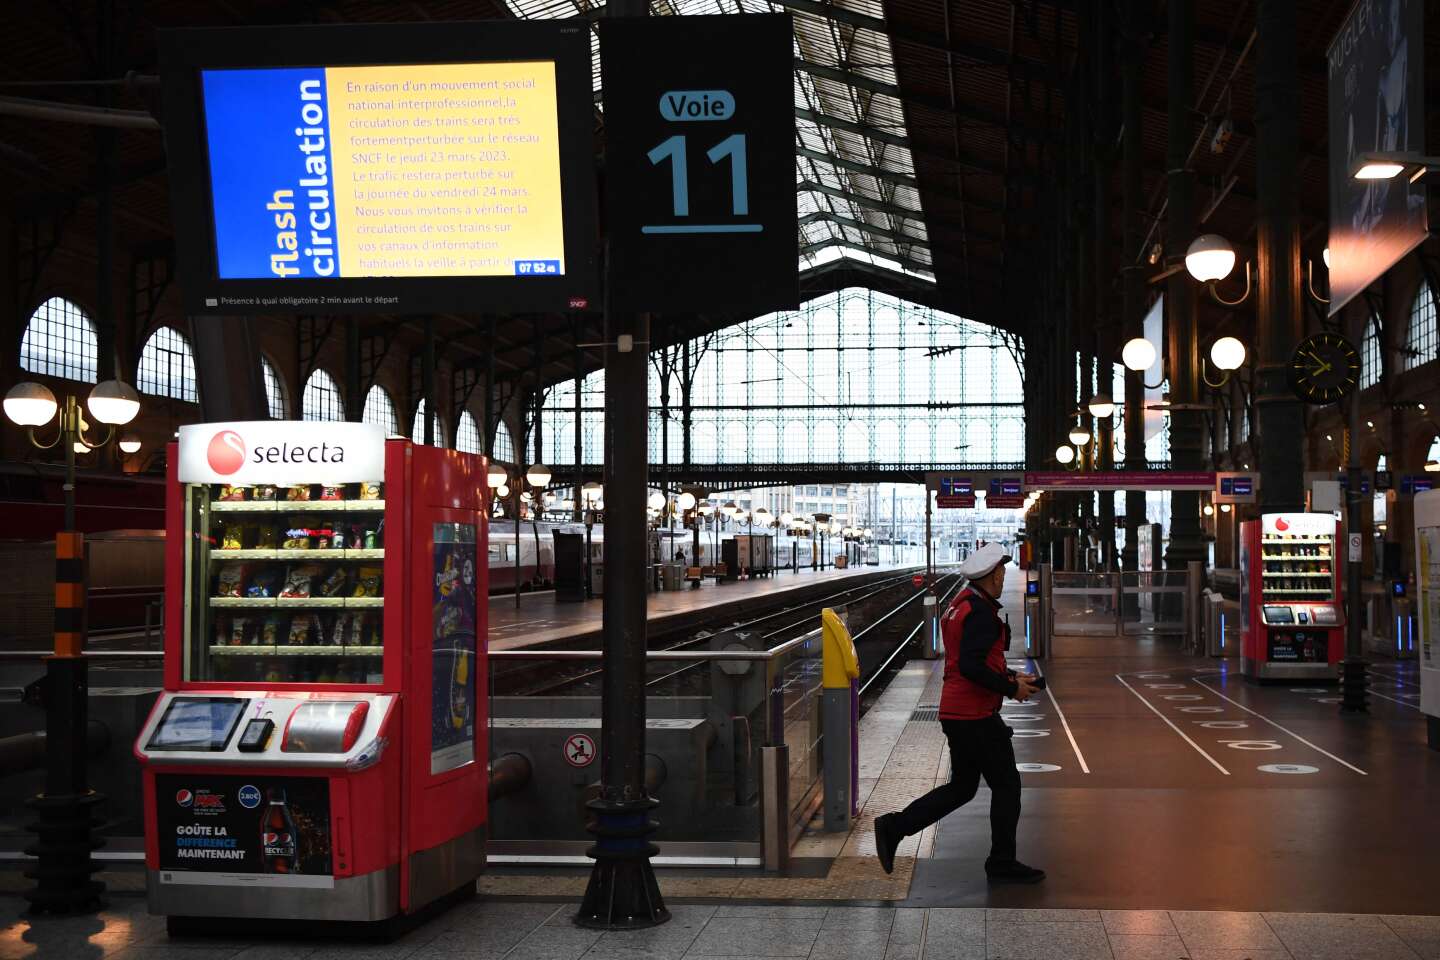 Ceetrus, the Auchan real estate company, ordered to pay more than 47 million euros to the SNCF